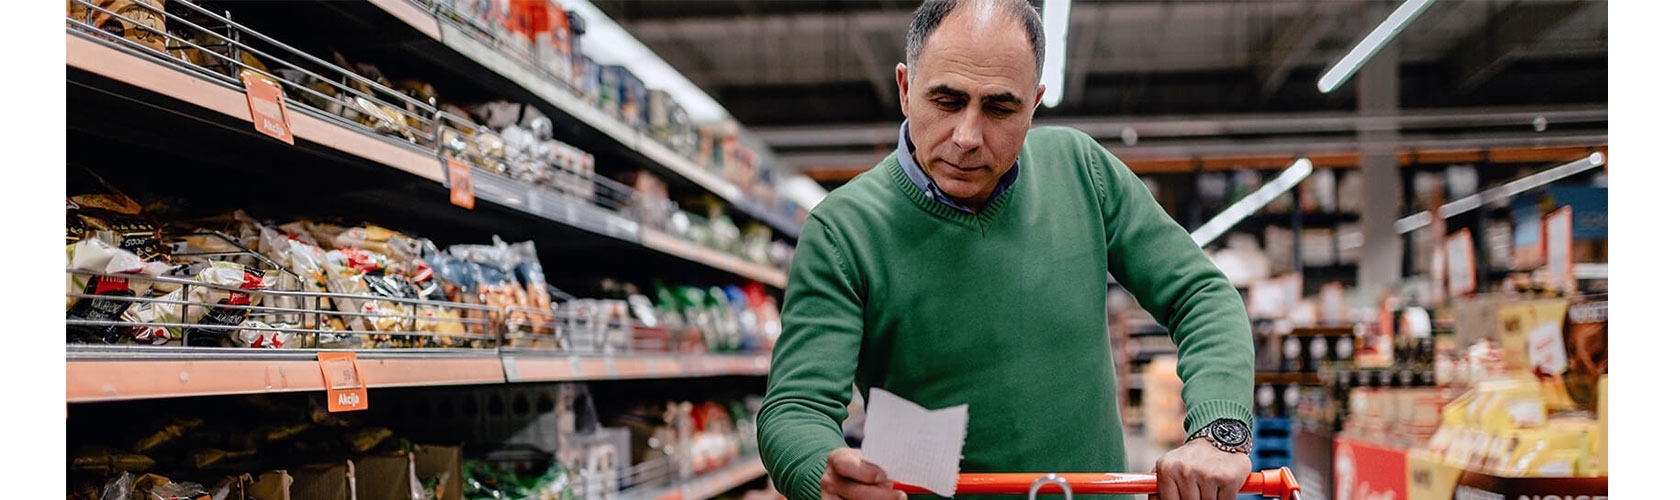 A man shops from a list at grocery store